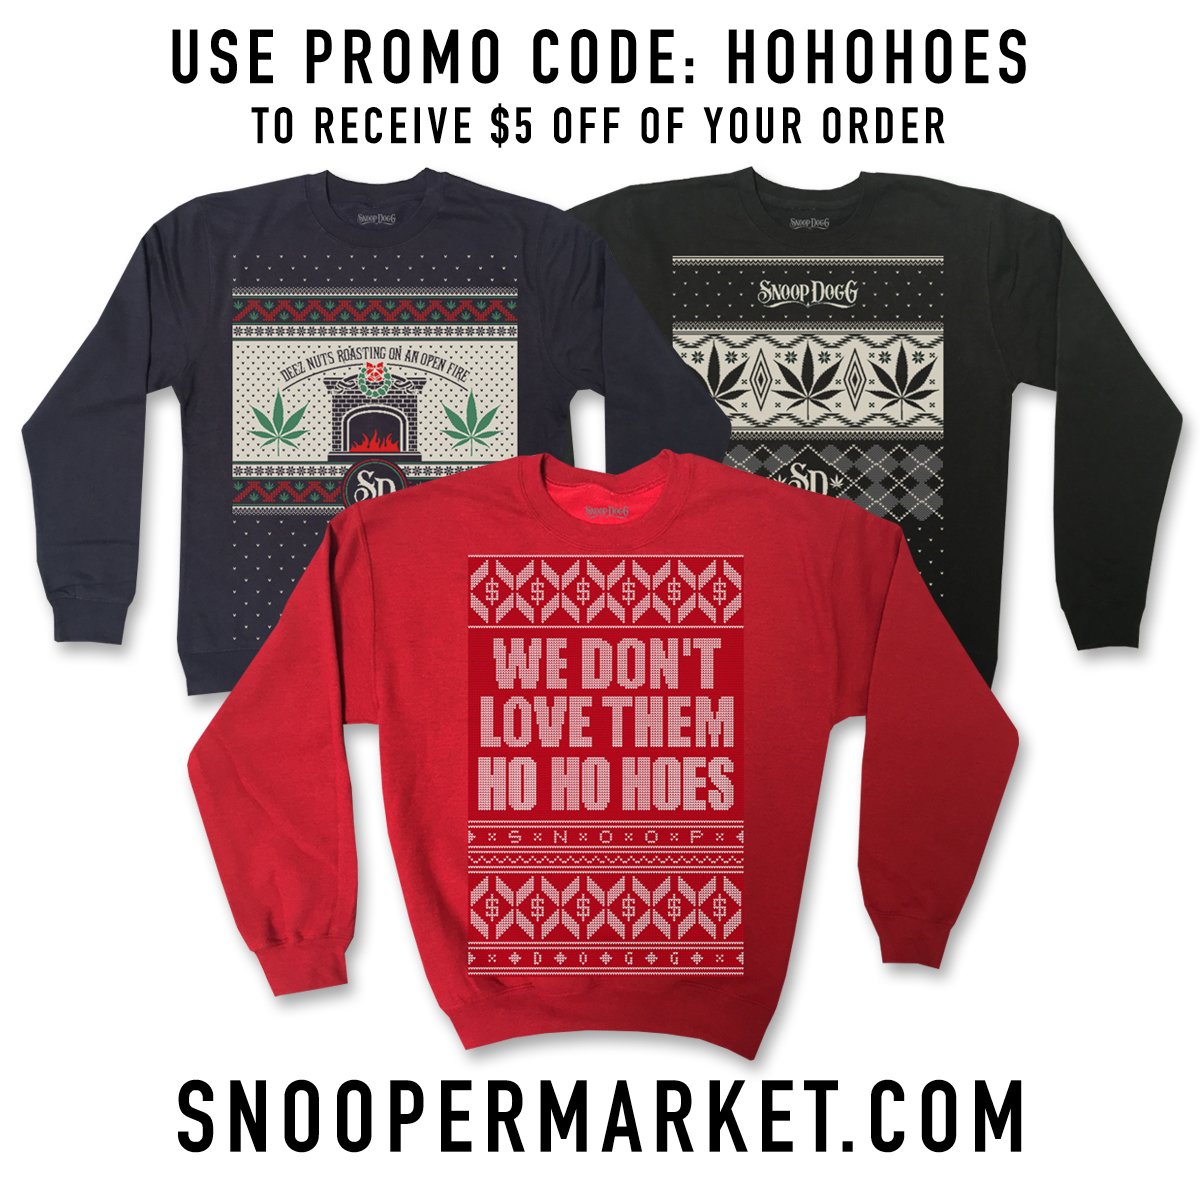 ur fav holiday sweaters now on SALE !! wat u waitin 4 ?? get urs now at https://t.co/H3bf8rmvaQ yadigg https://t.co/6LZ2jO03gK